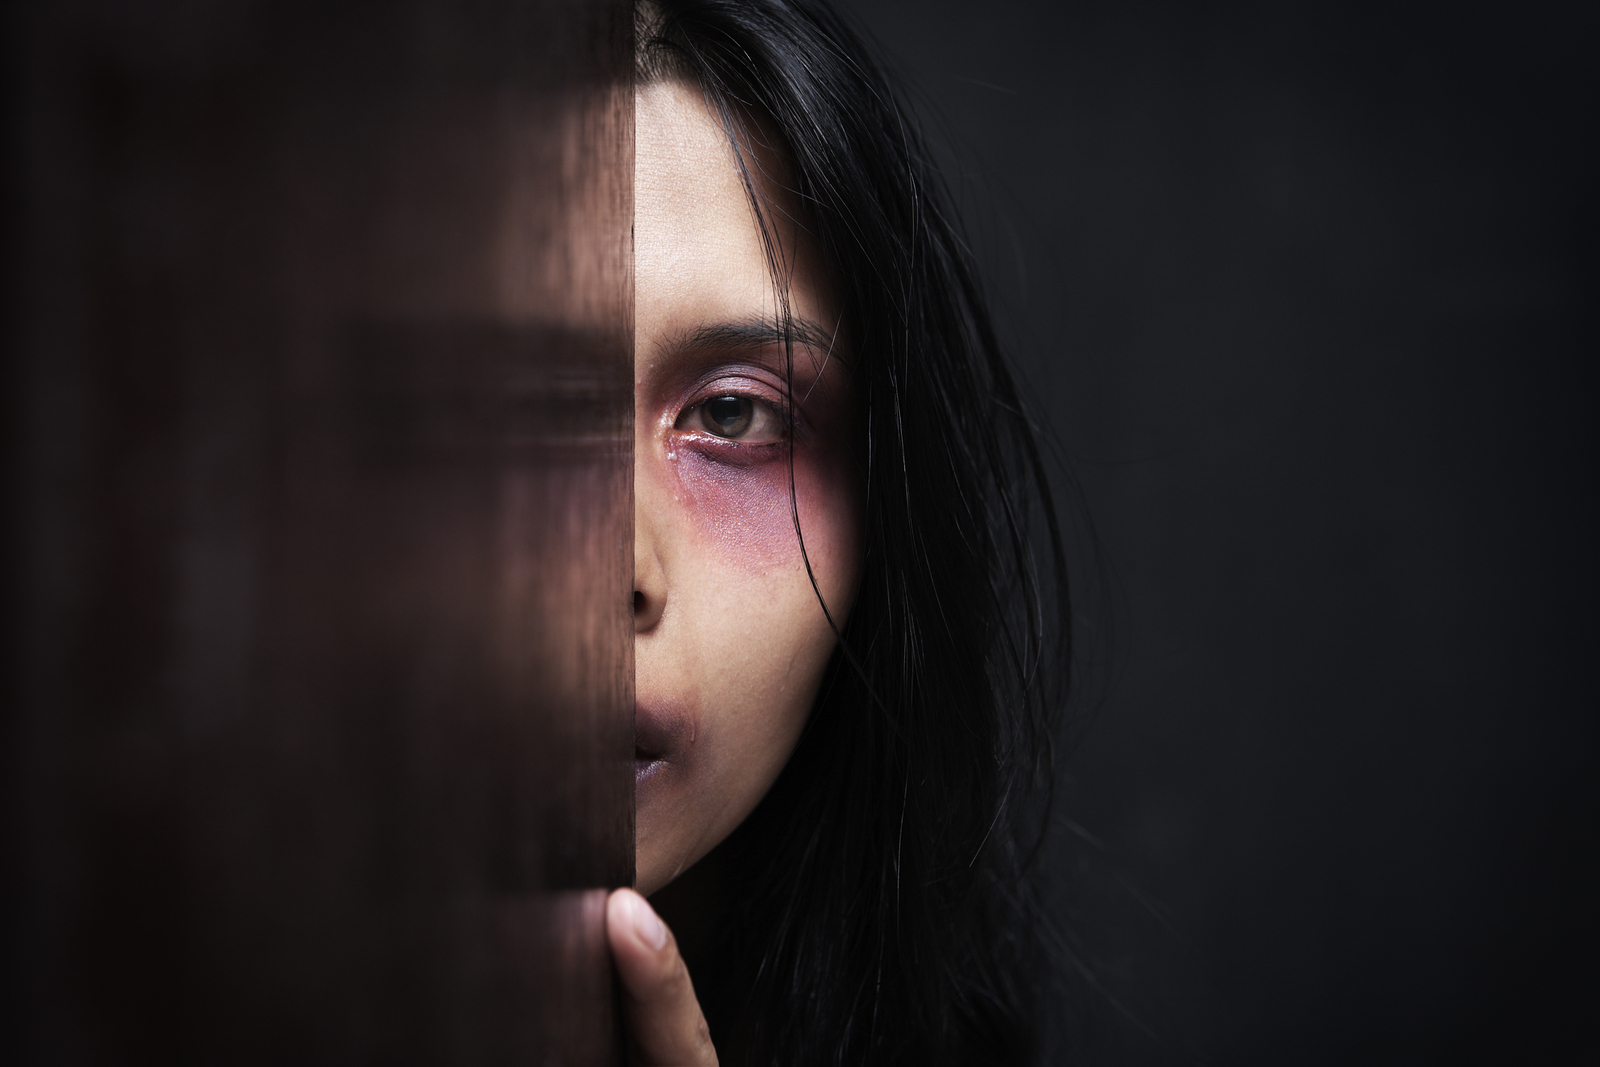 Injured woman hiding in dark concept for domestic violence